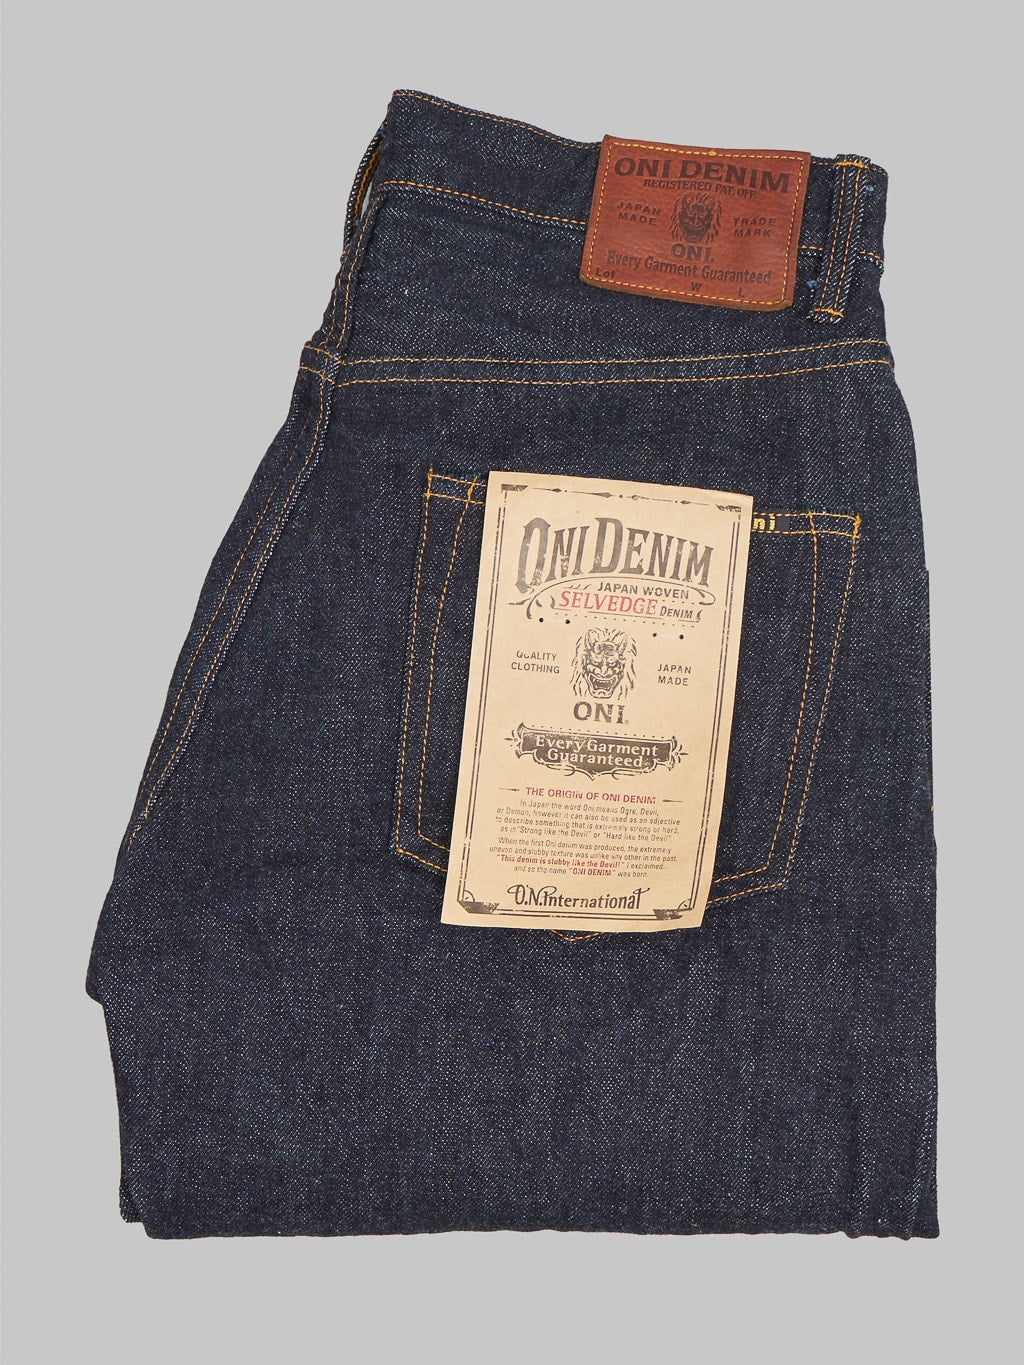 ONI Denim 200 Low Tension 15oz Wide Straight Jeans made in japan